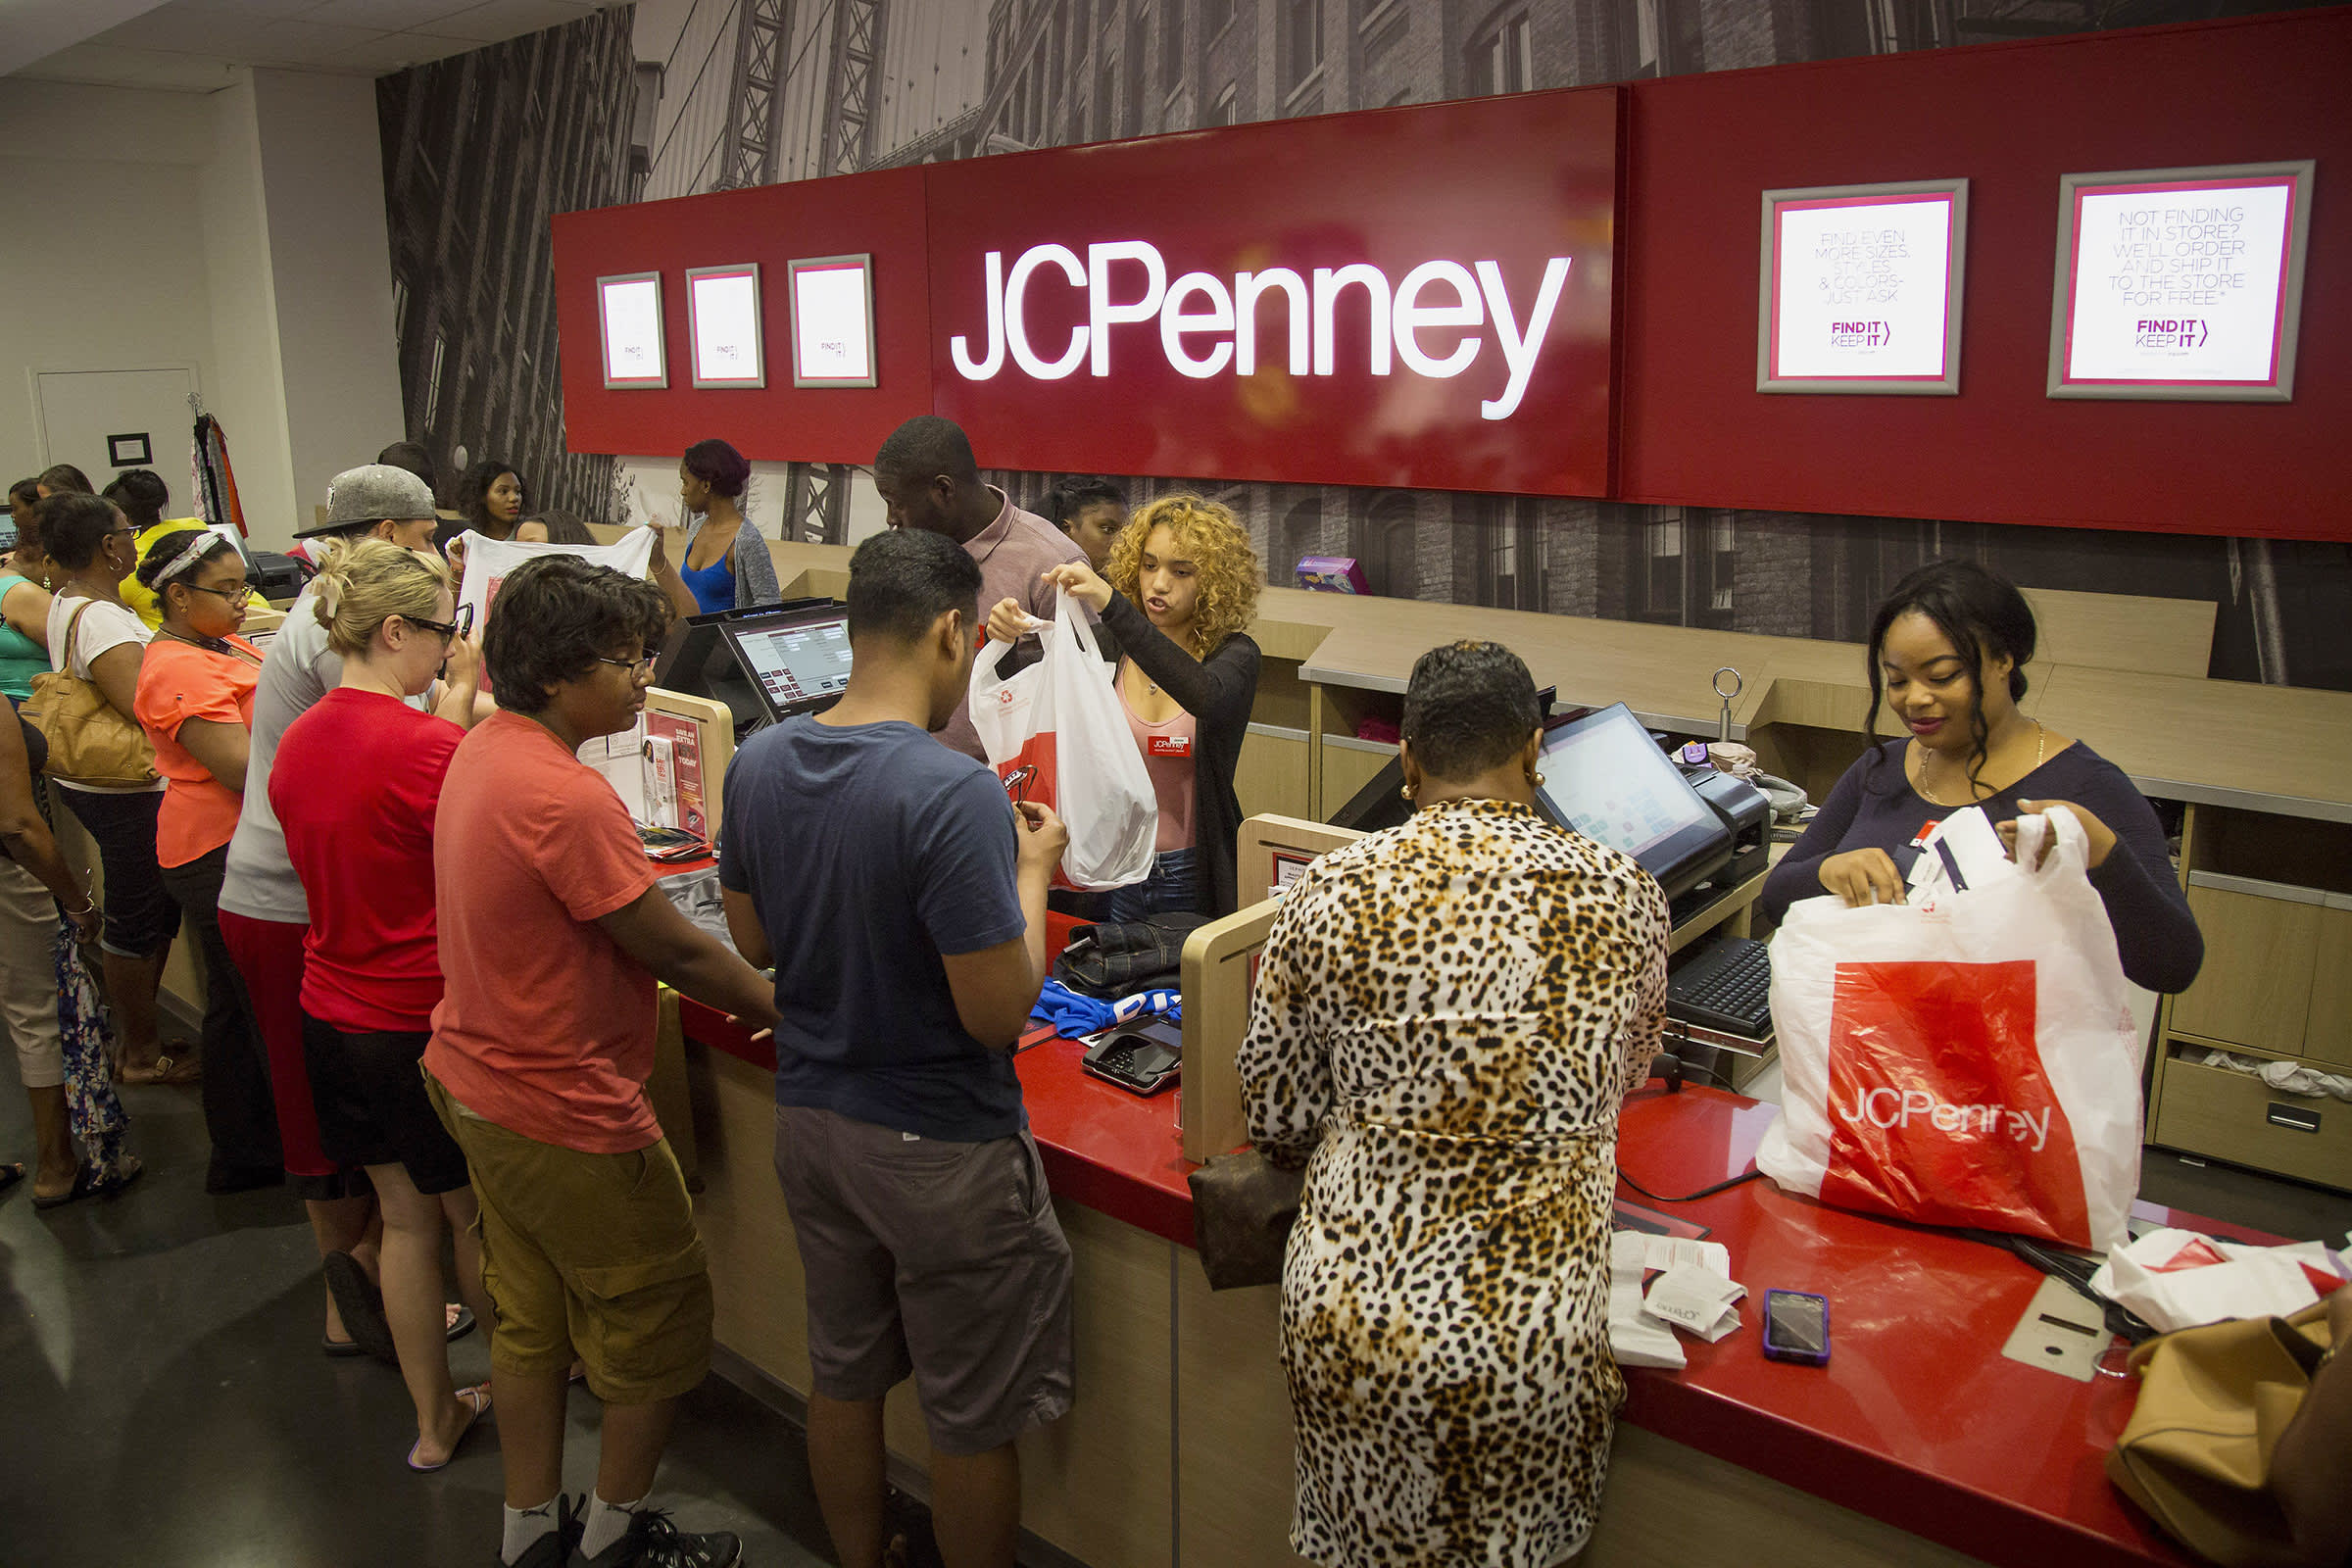 Longview store not on list of 138 J.C. Penney closures, Business